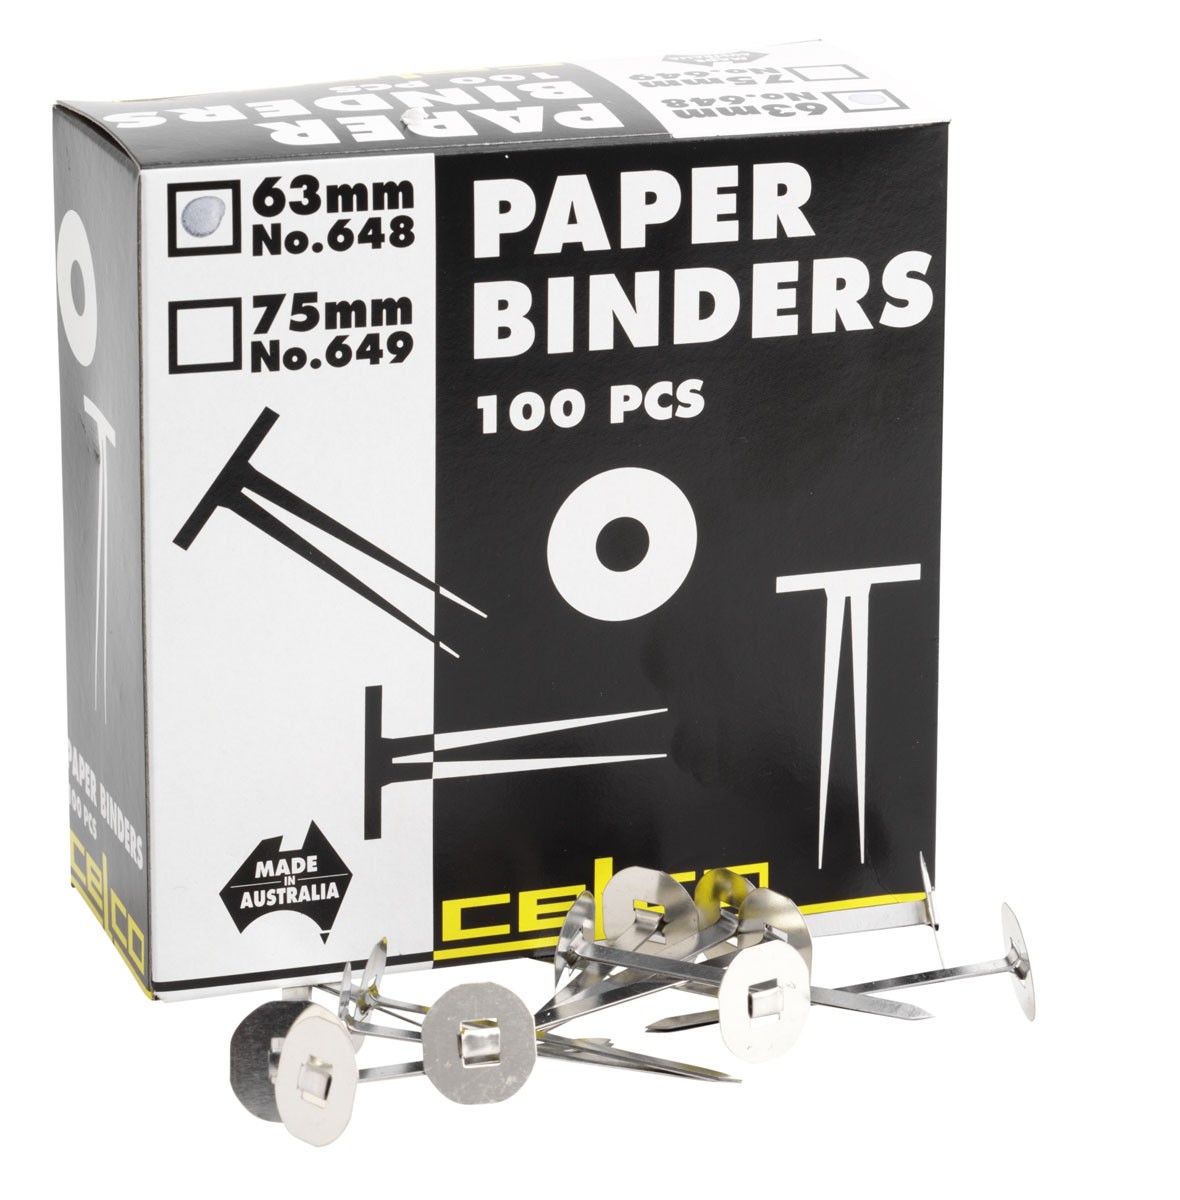 CELCO PAPER BINDERS 63mm #648 (price excludes gst)